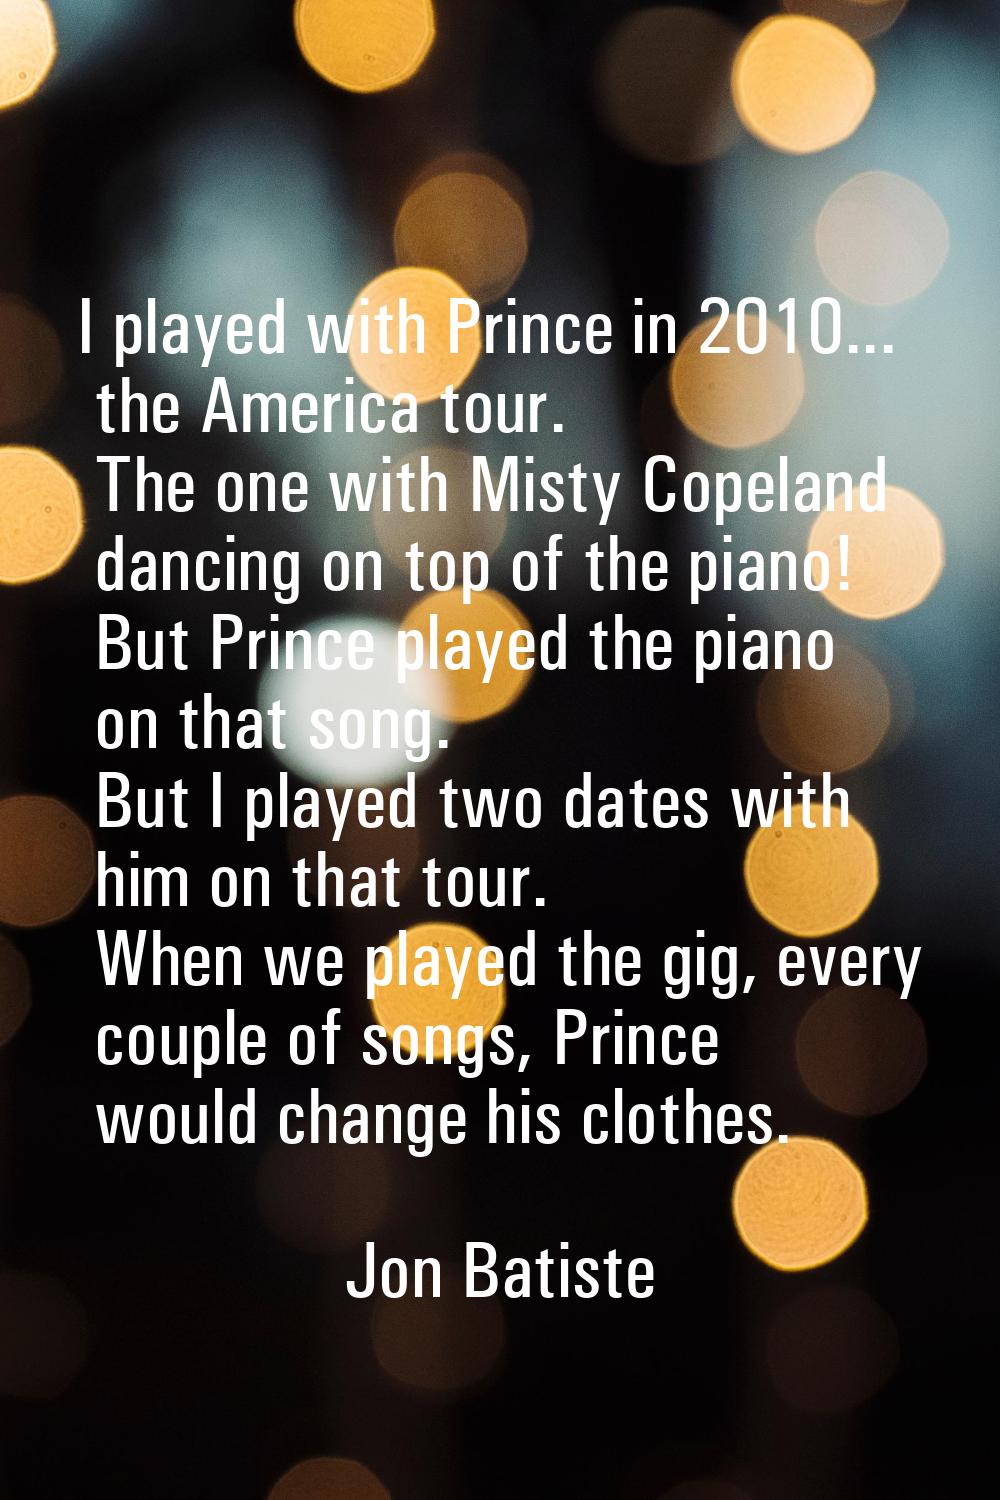 I played with Prince in 2010... the America tour. The one with Misty Copeland dancing on top of the